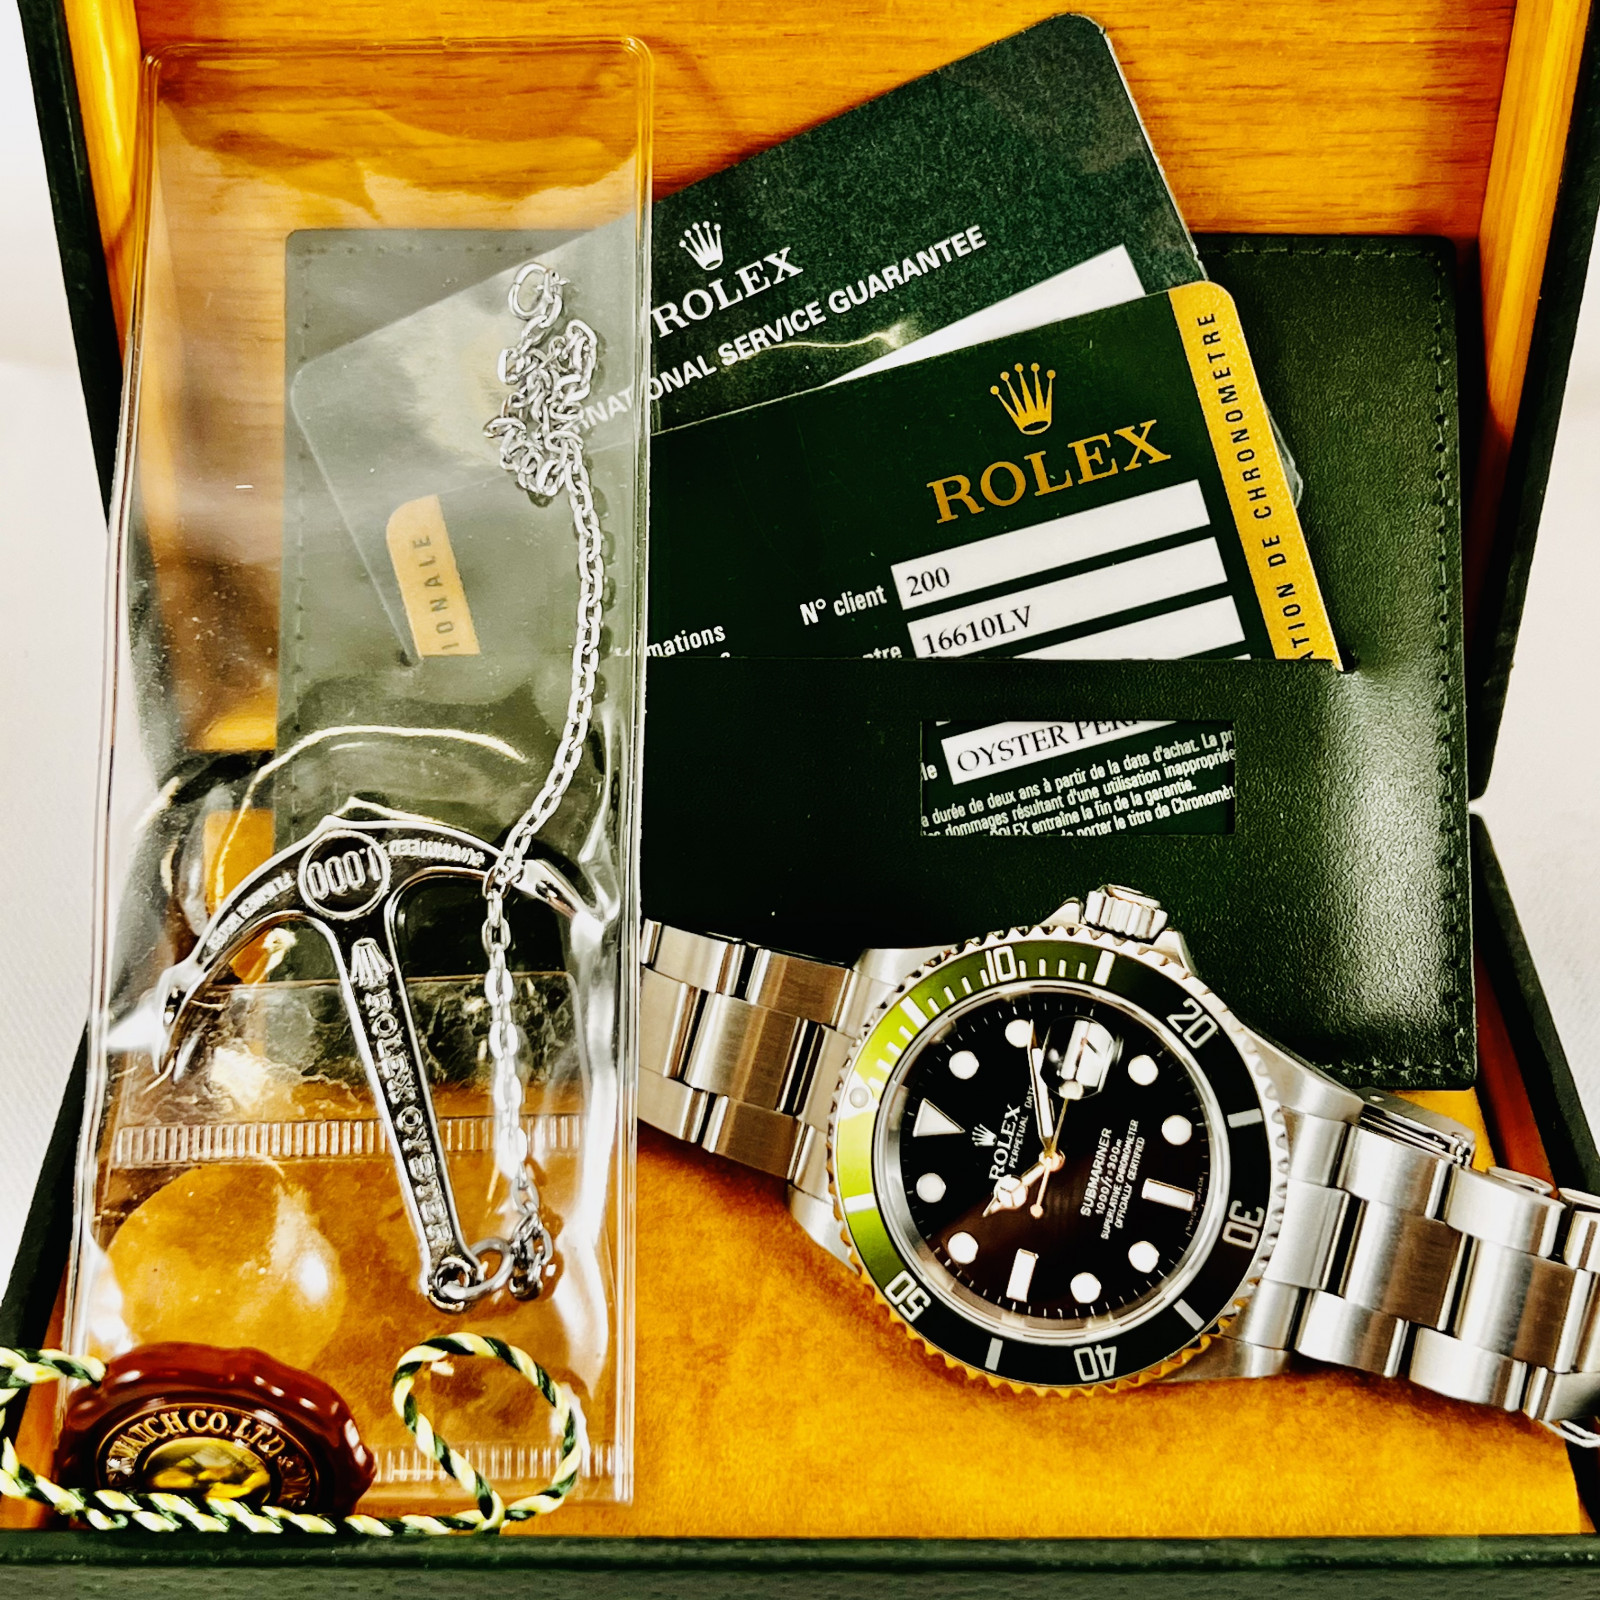 Pre-Owned Rolex Submariner 16610LV